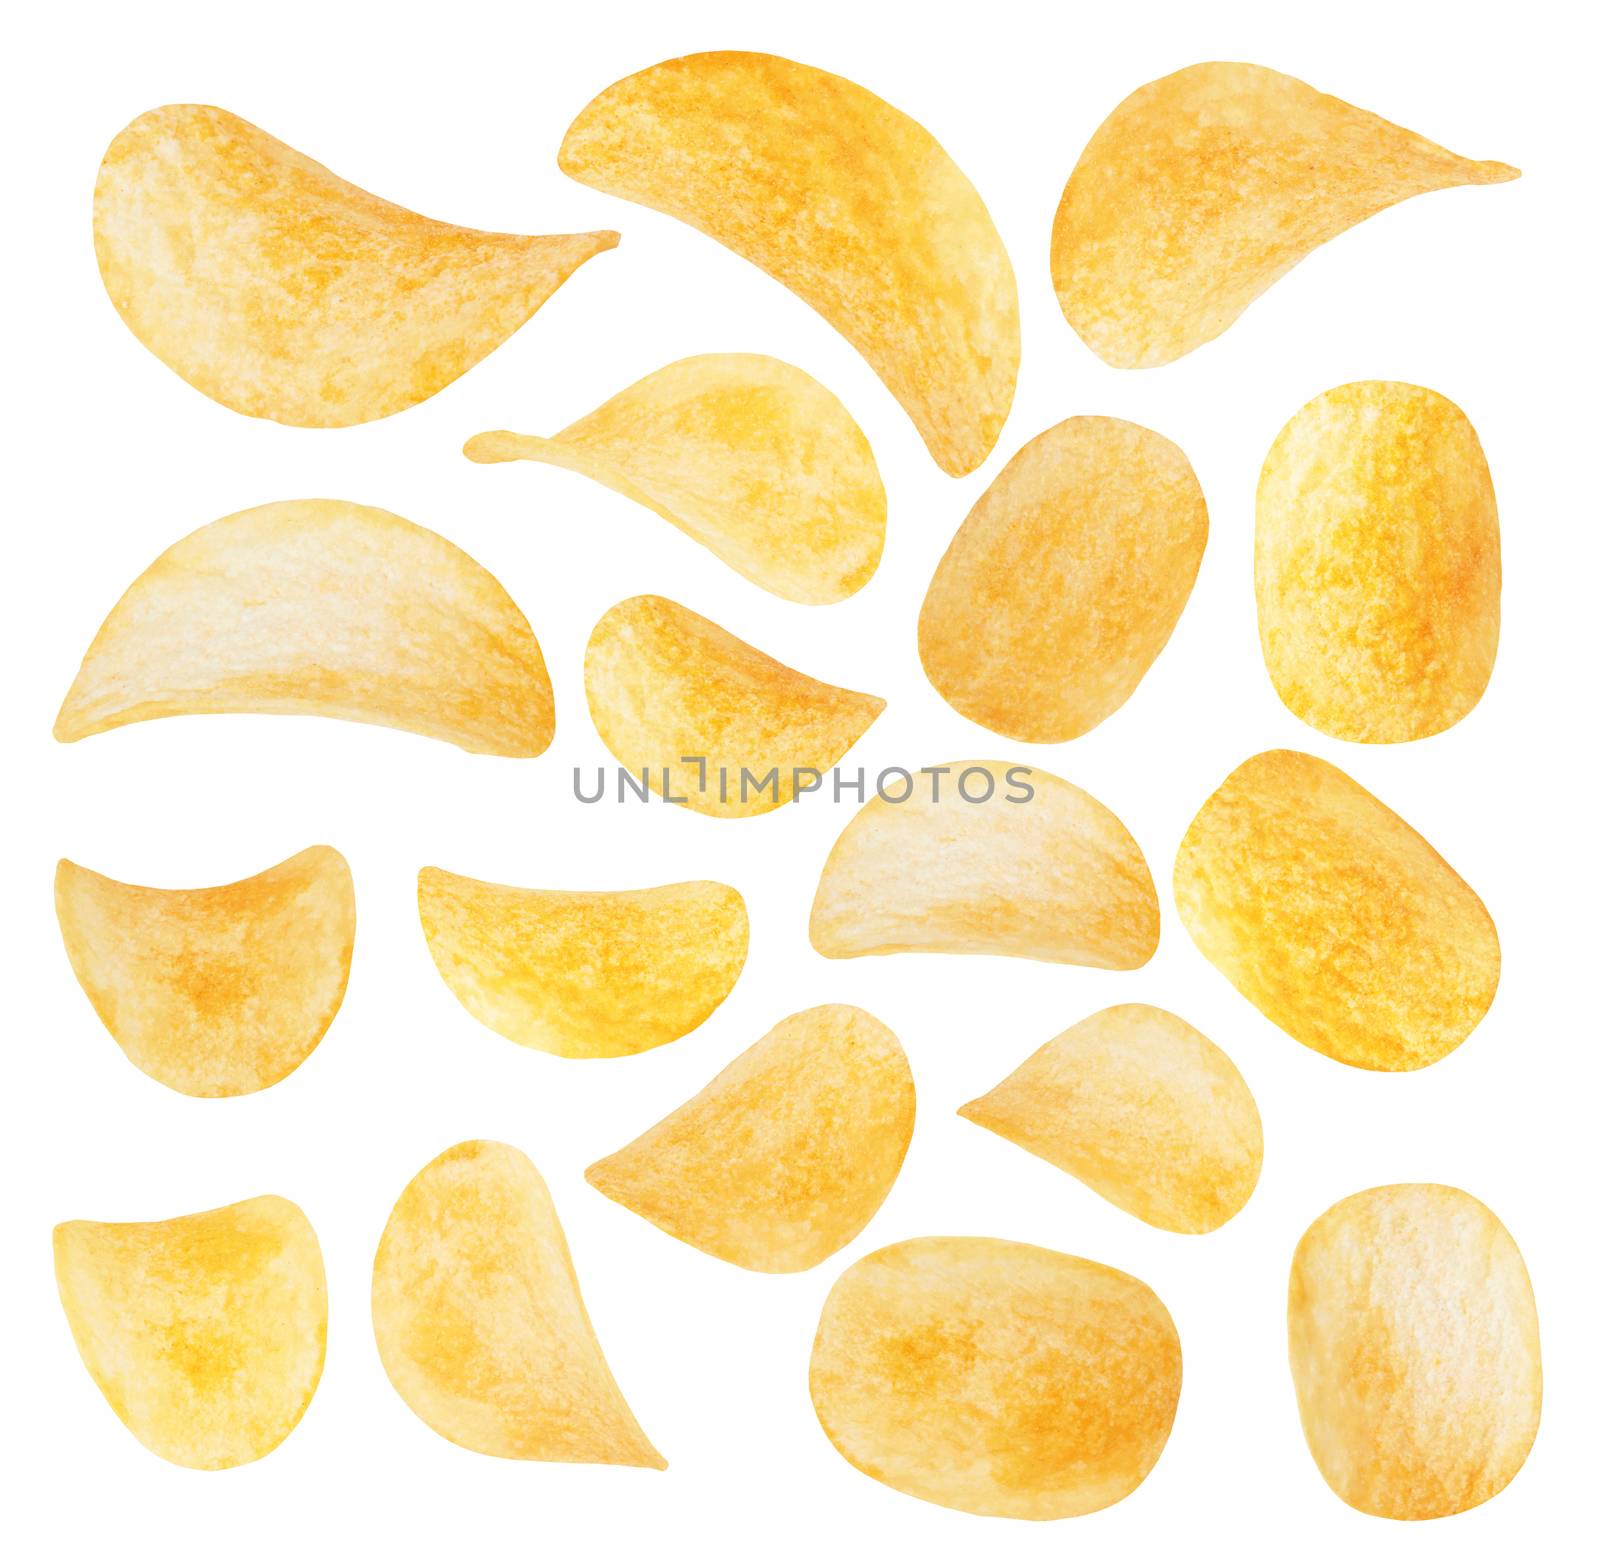 potato chips close-up isolated on a white background 